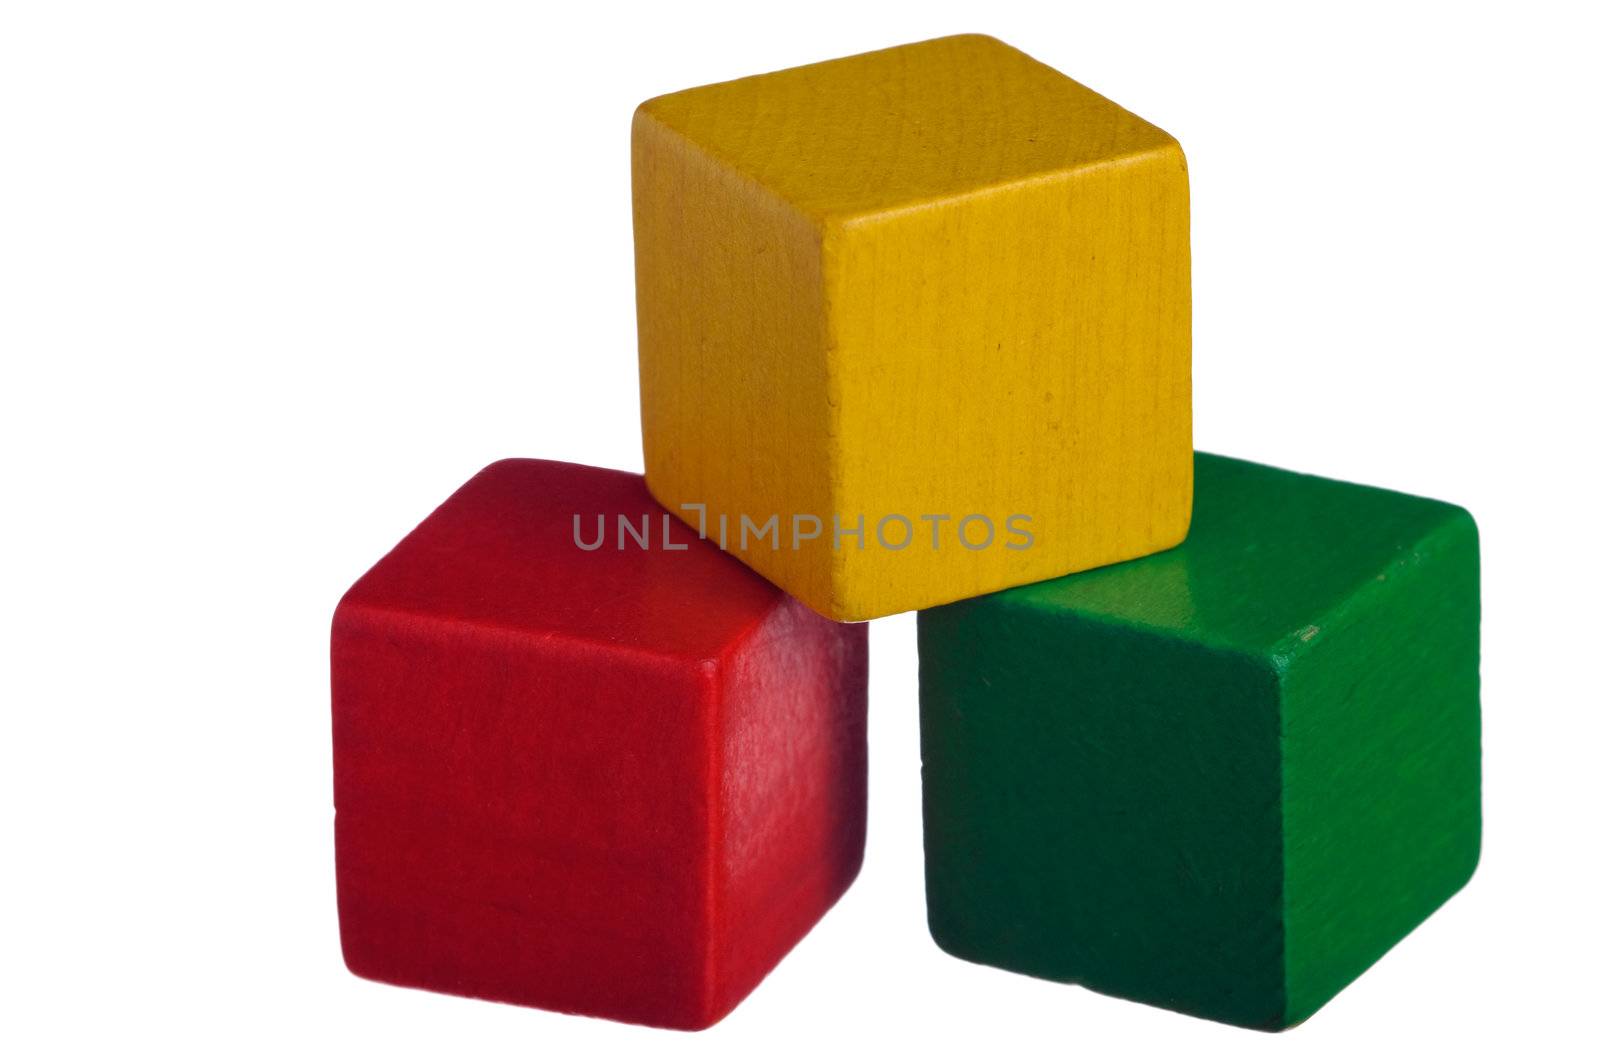 Colorful wooden childen's building blocks isolated on white background